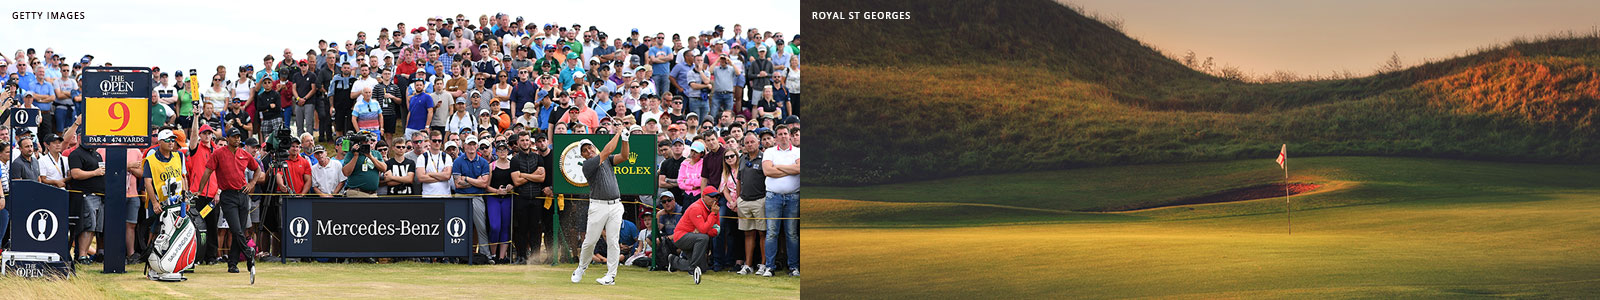 PerryGolf is an Authorised Ticket Provider of Attendance Packages to The 149th Open at Royal St. Georges 2021.